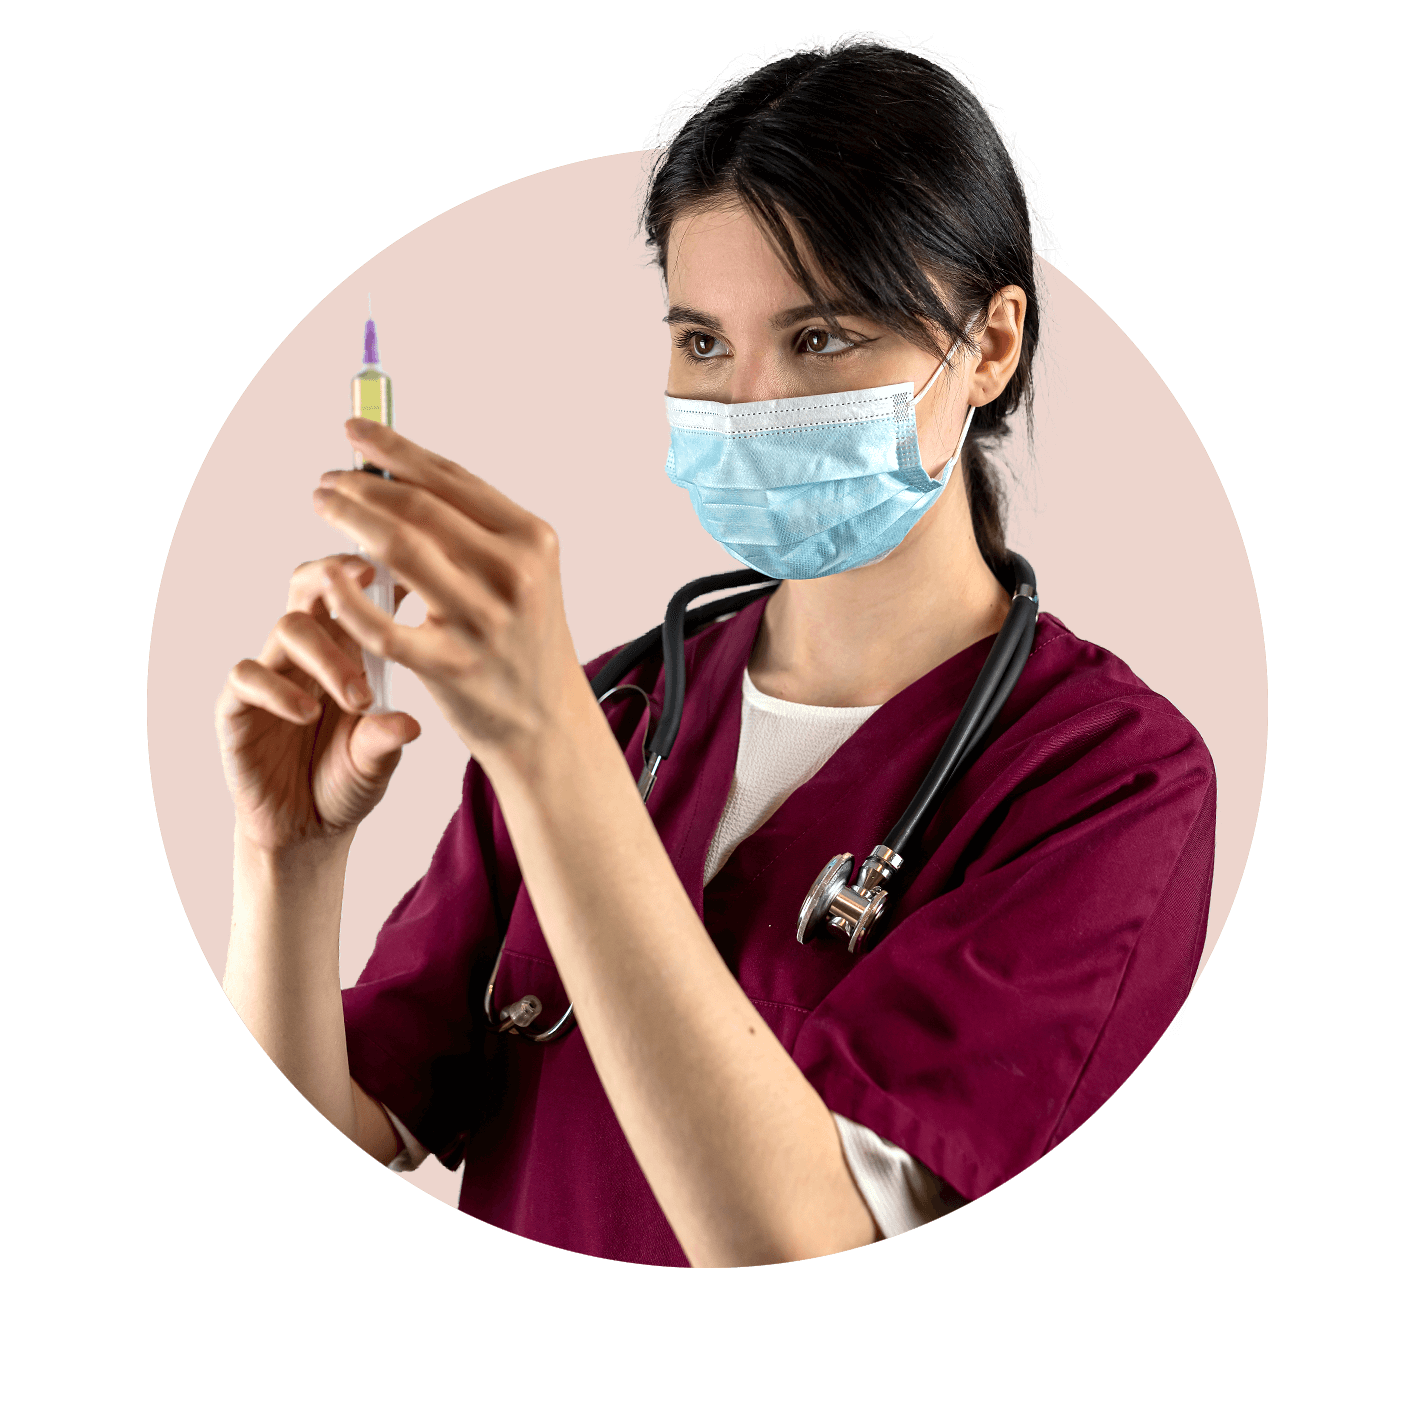 Nurse in burgundy scrubs with mask on and holding vaccine